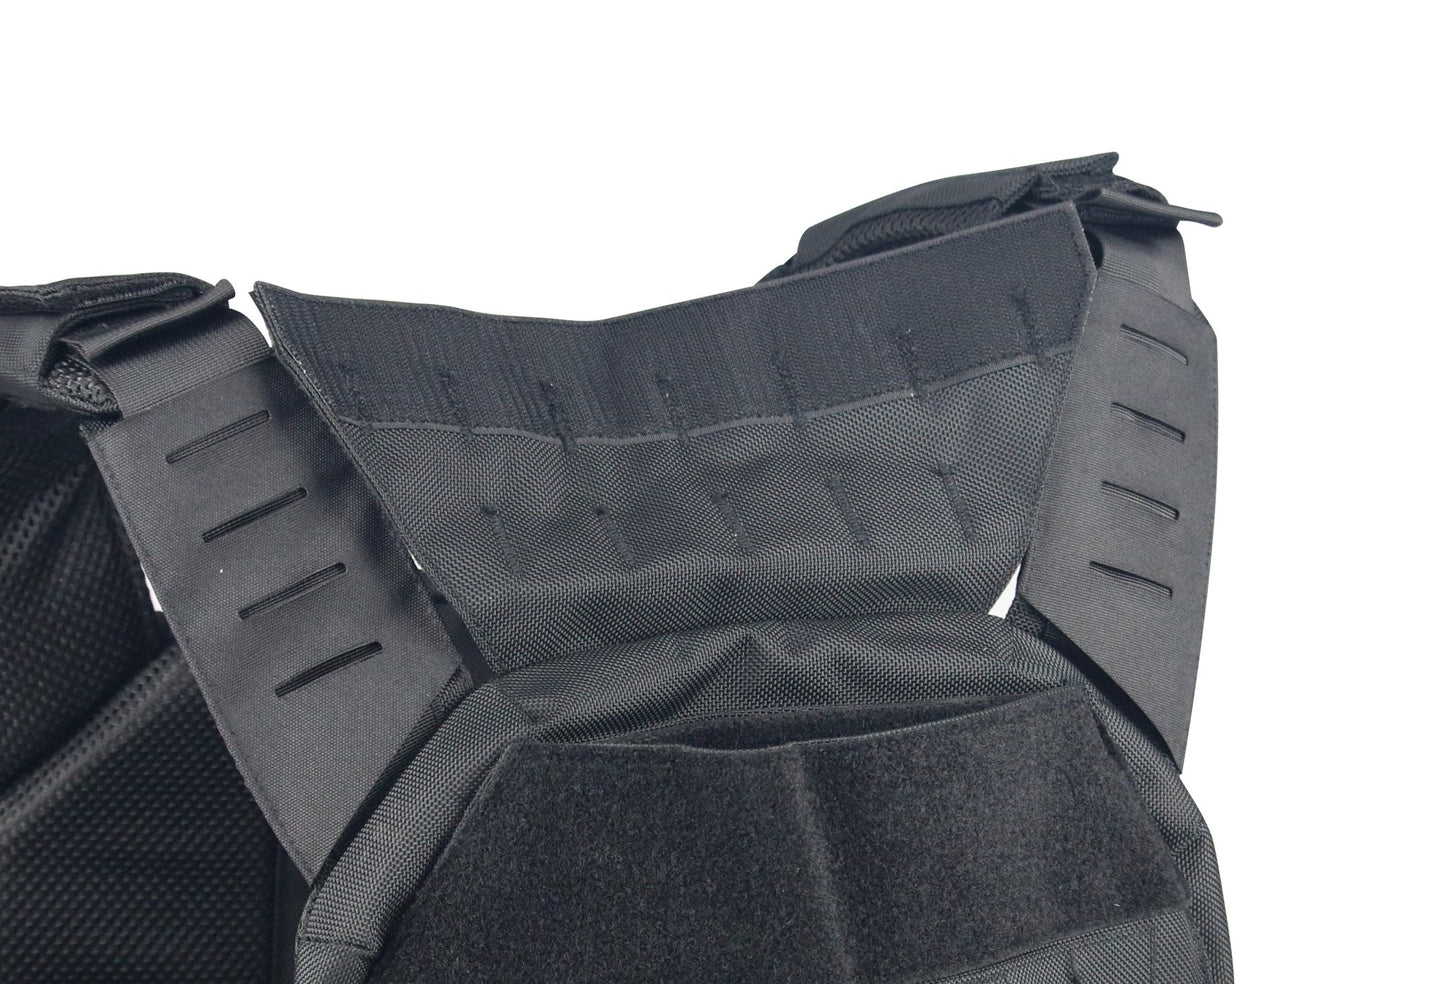 GTS FIREFIGHT Plate Carrier - Gilliam Technical Services, Inc.